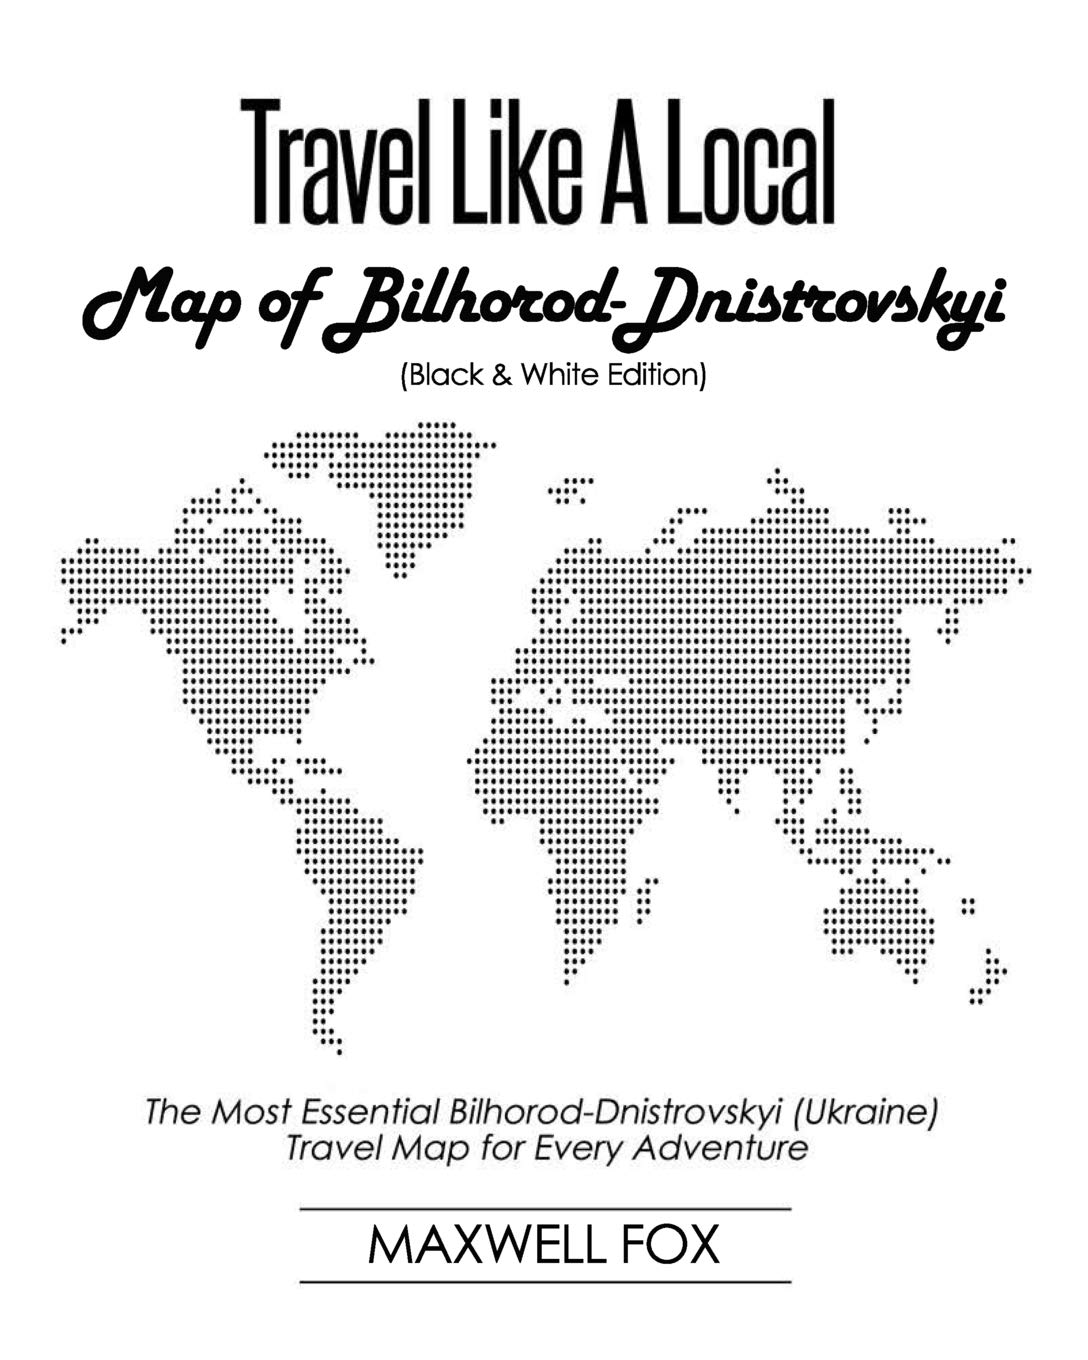 Travel Like a Local - Map of Bilhorod-Dnistrovskyi: The Most Essential Bilhorod-Dnistrovskyi (Ukraine) Travel Map for Every Adventure